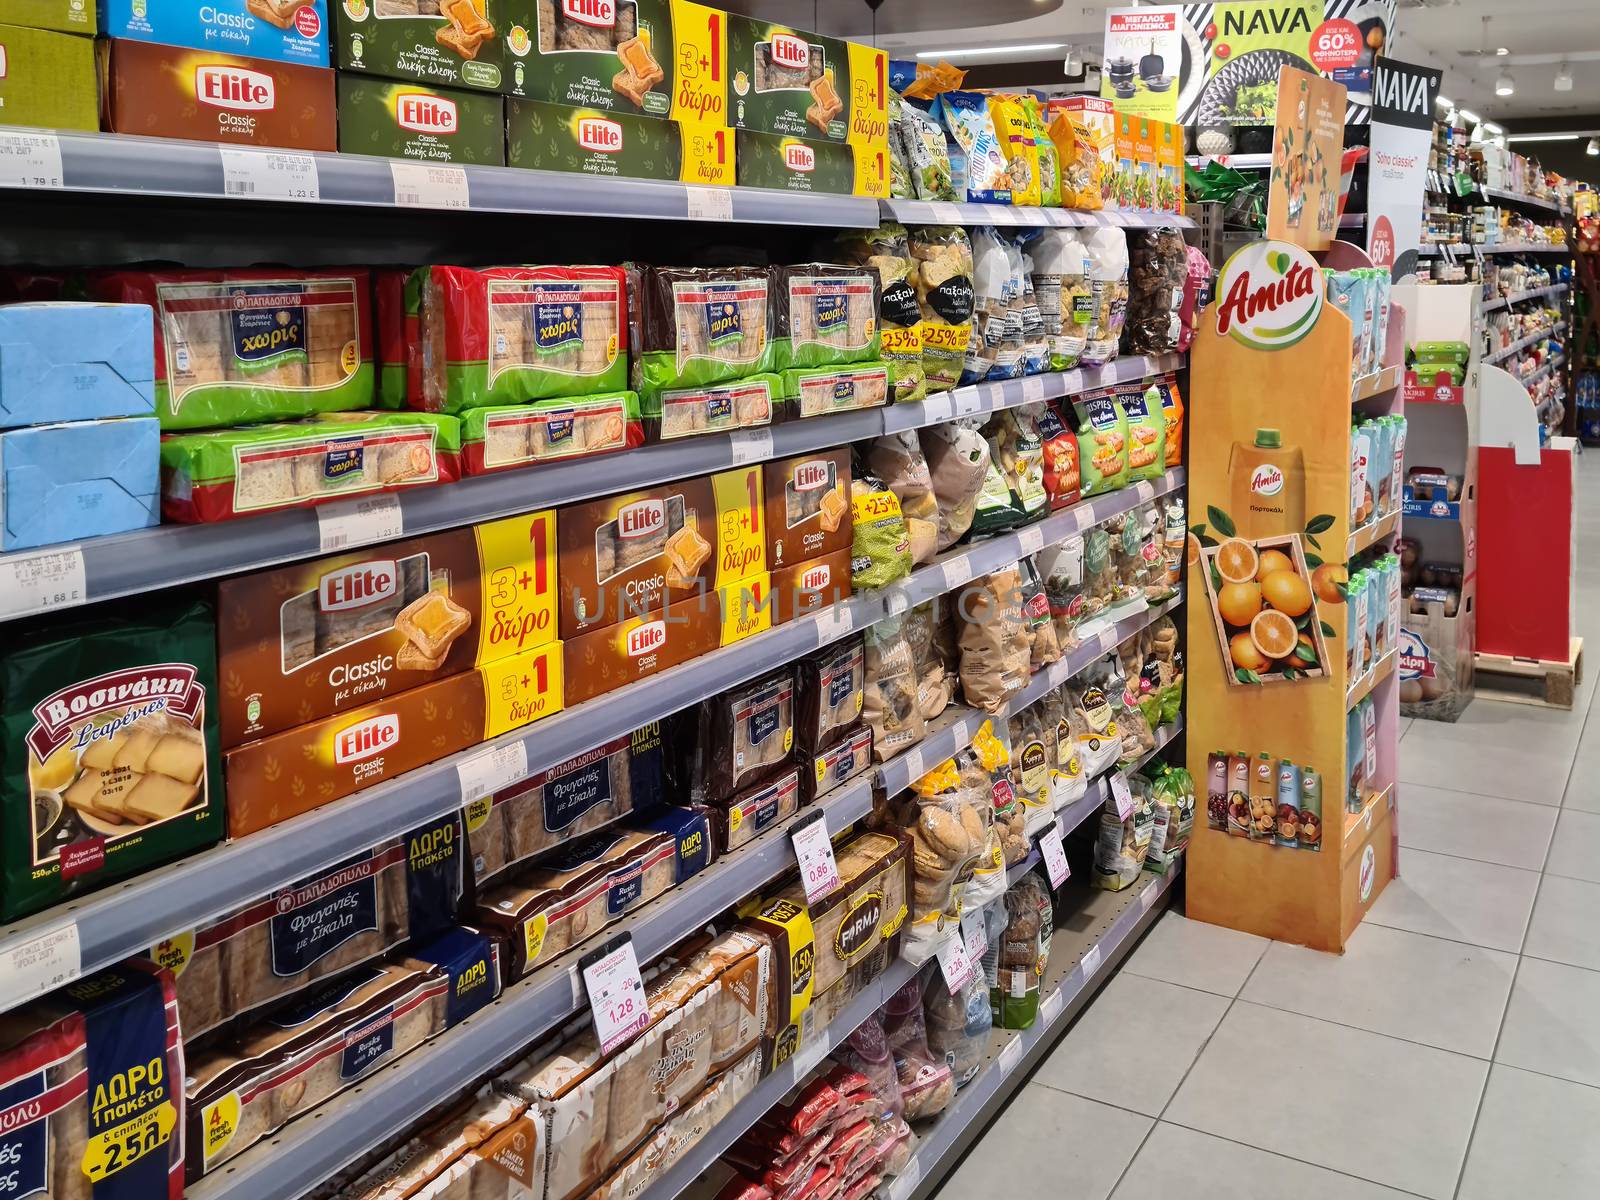 Interior view of food goods sold at local store chain Masoutis in Thessaloniki, Greece.